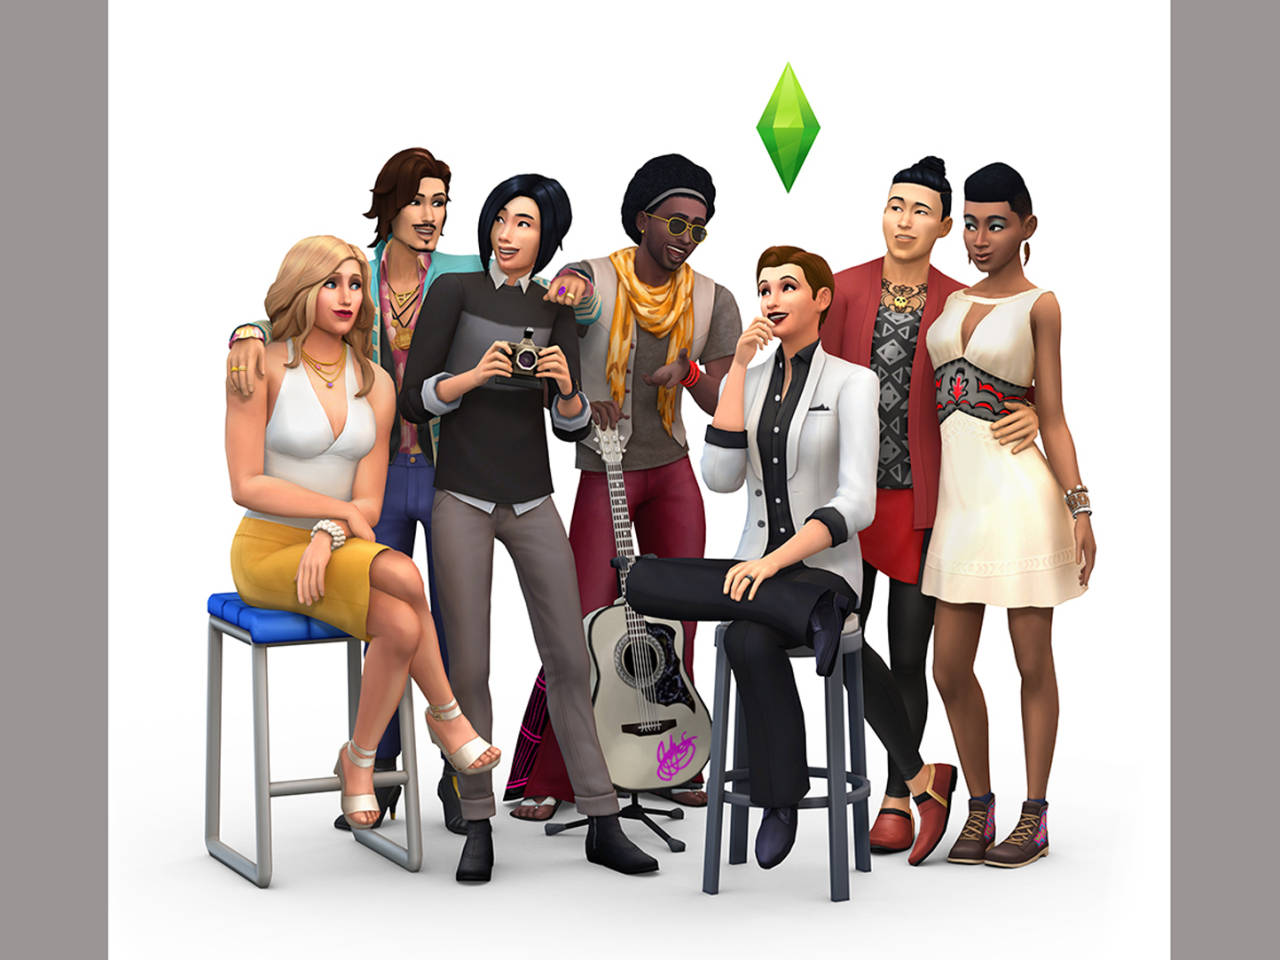 This image released by Electronic Arts shows the new diverse characters that will be available on "The Sims 4" the latest edition of "The Sims" video game. (Electronic Arts via AP)